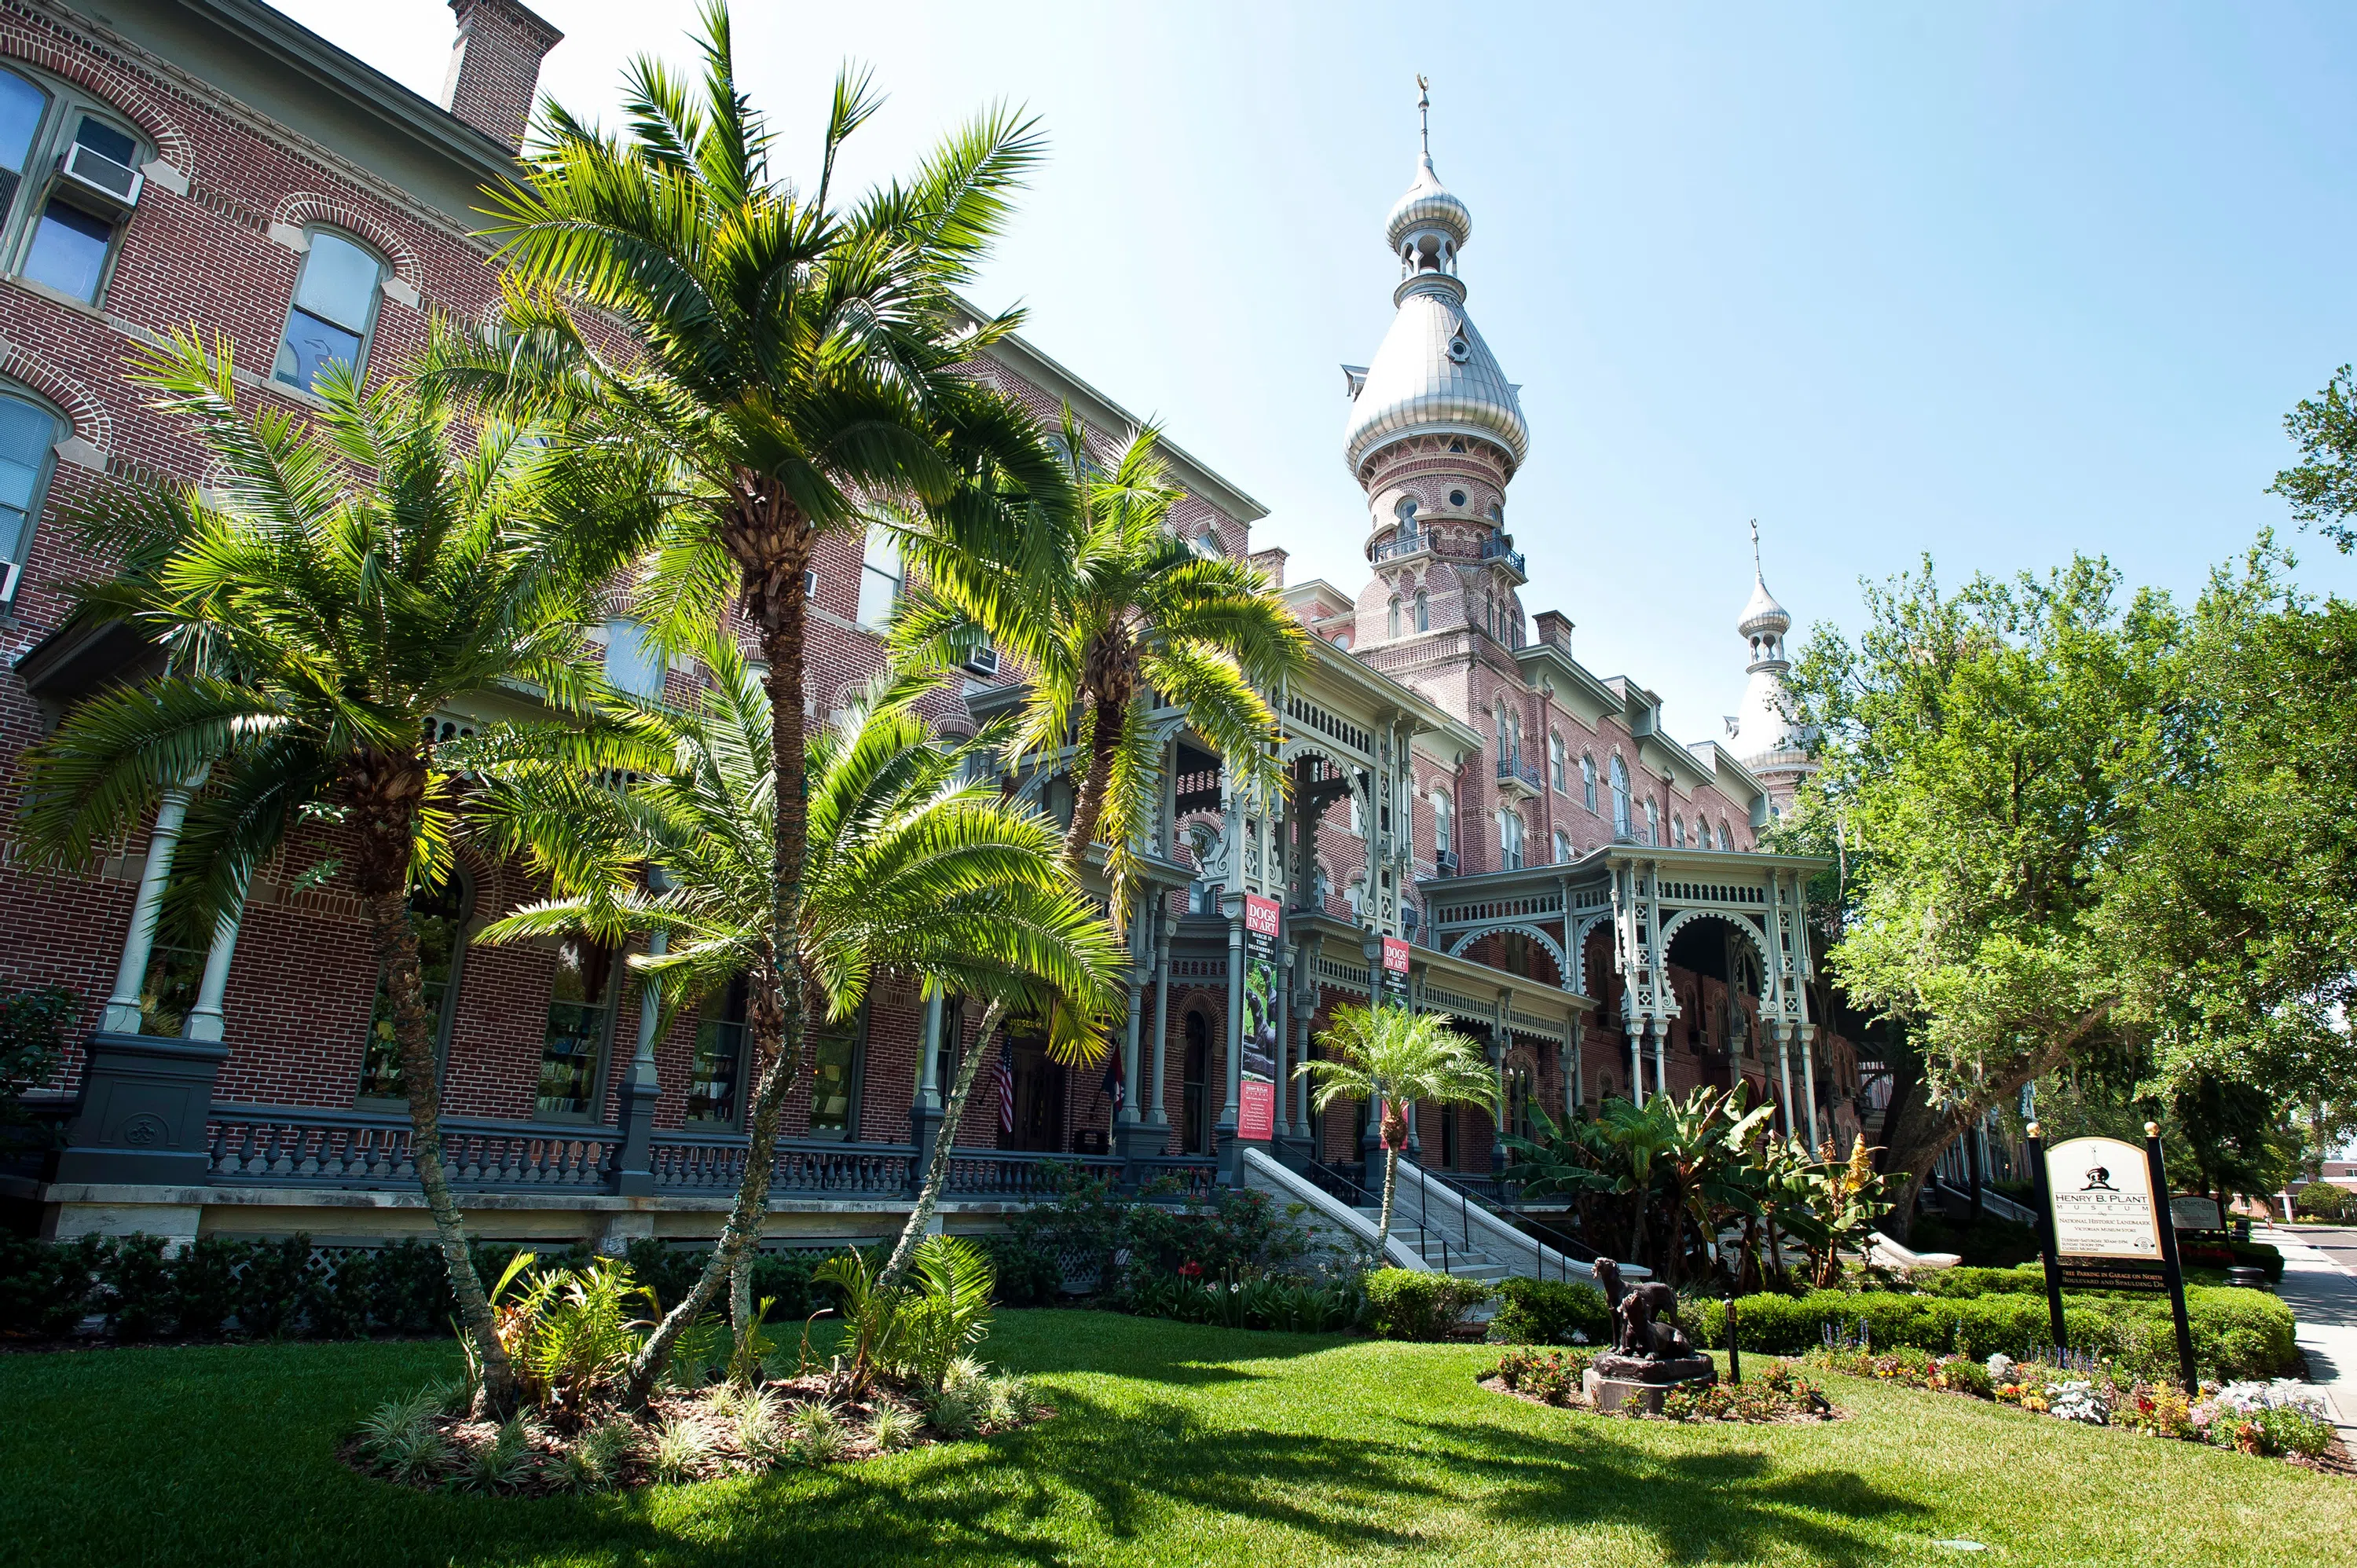 Exterior of Plant Hall surrounded by palm trees.